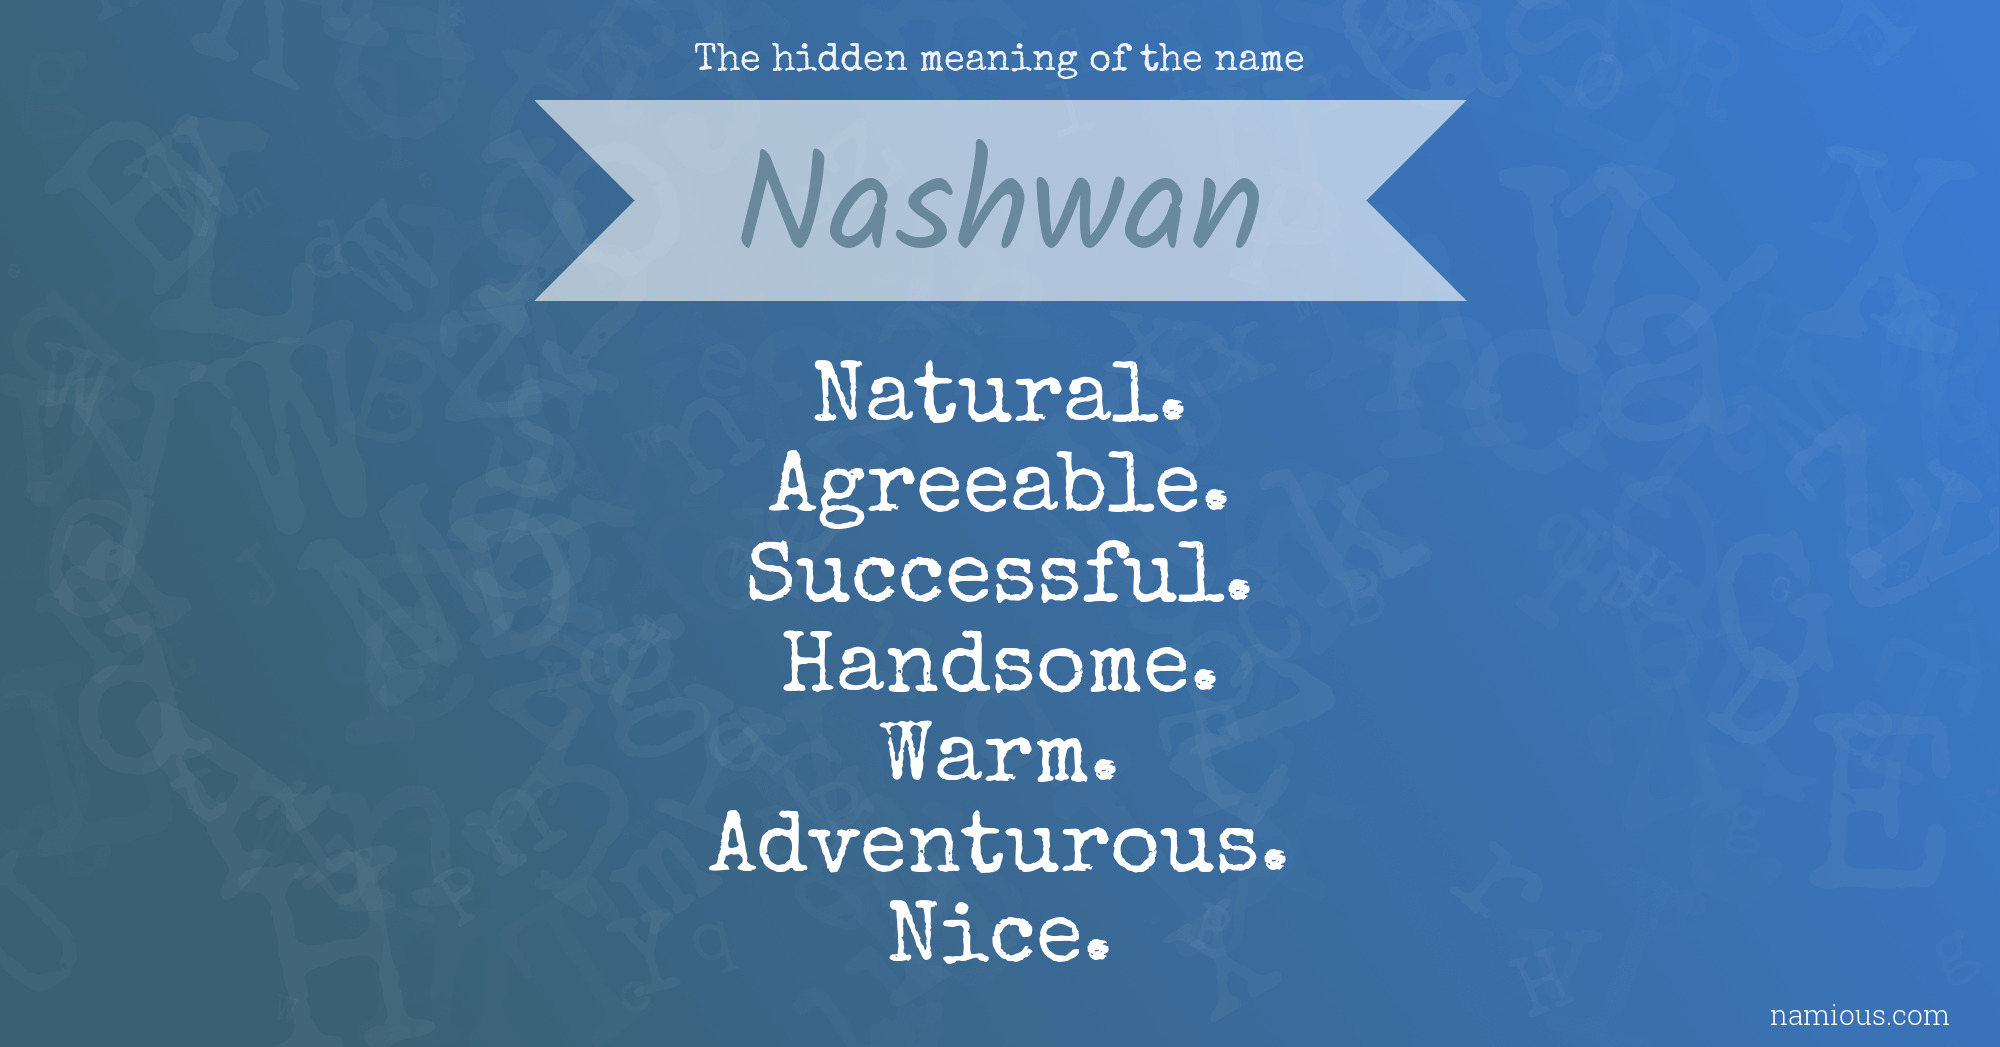 The hidden meaning of the name Nashwan